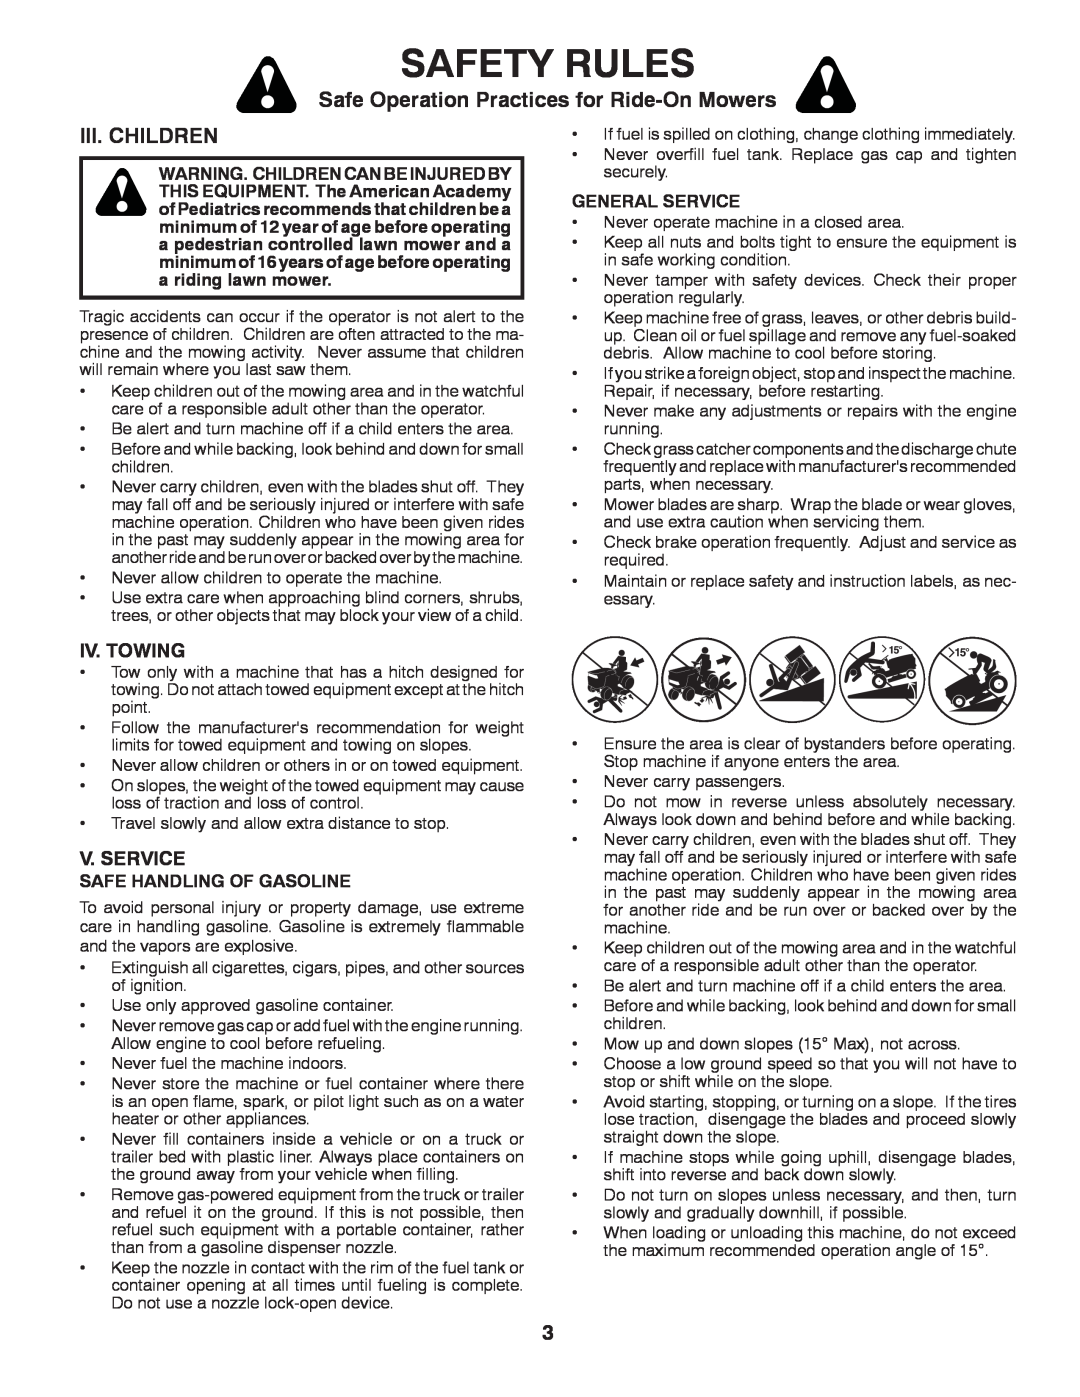 Poulan PB22H46YT warranty Iii. Children, Safety Rules, Safe Operation Practices for Ride-OnMowers, General Service 